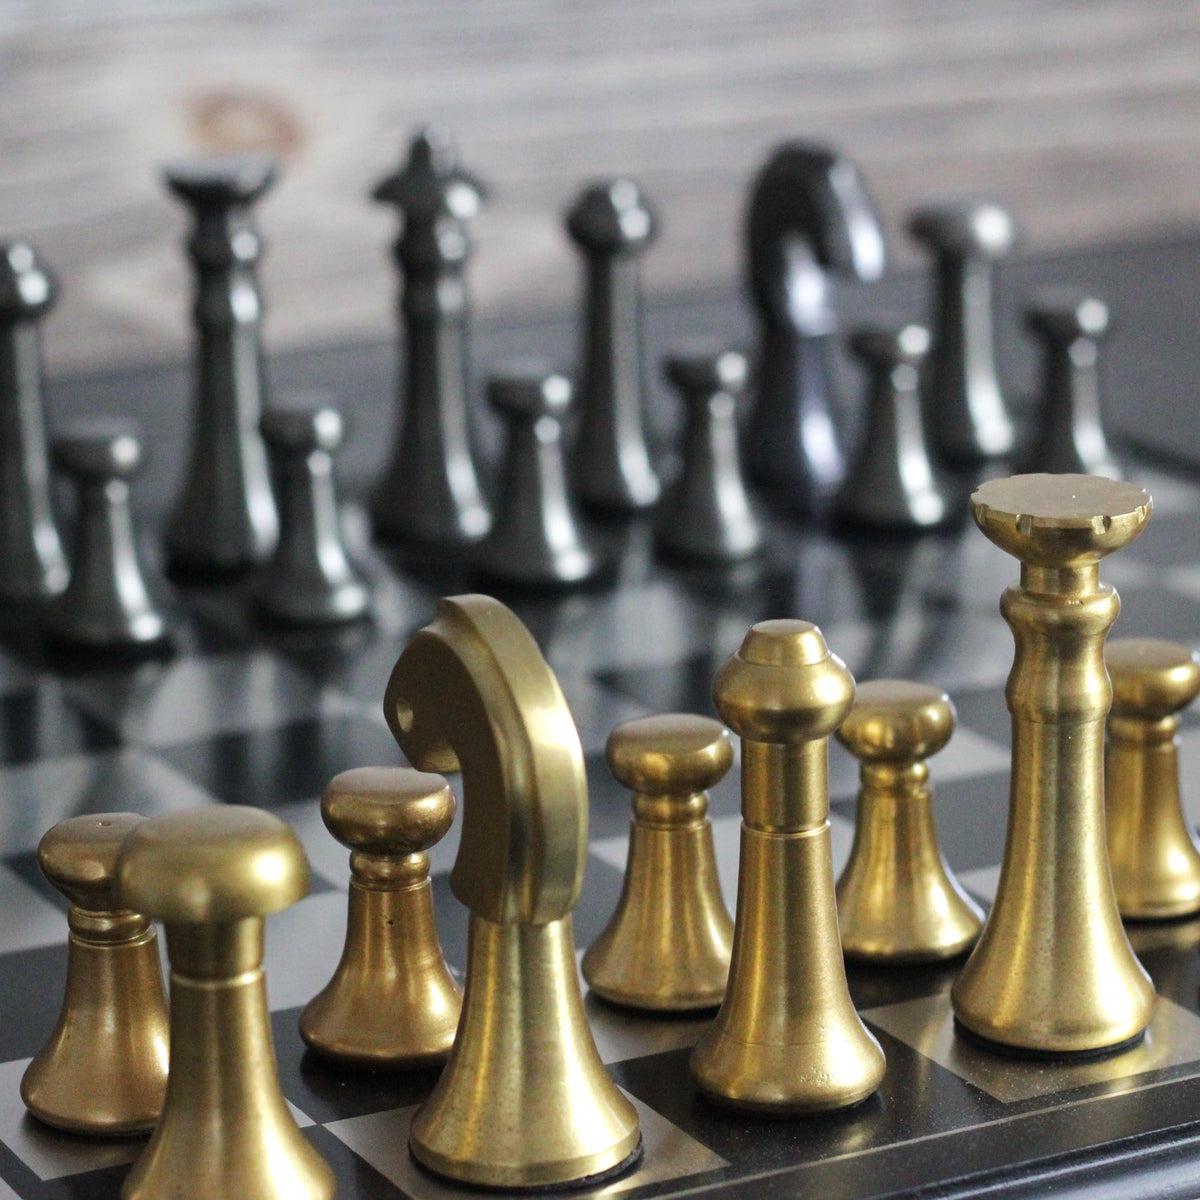 The Modern Defense - Black and Gold Metallic Chess Set - Marble Cultures